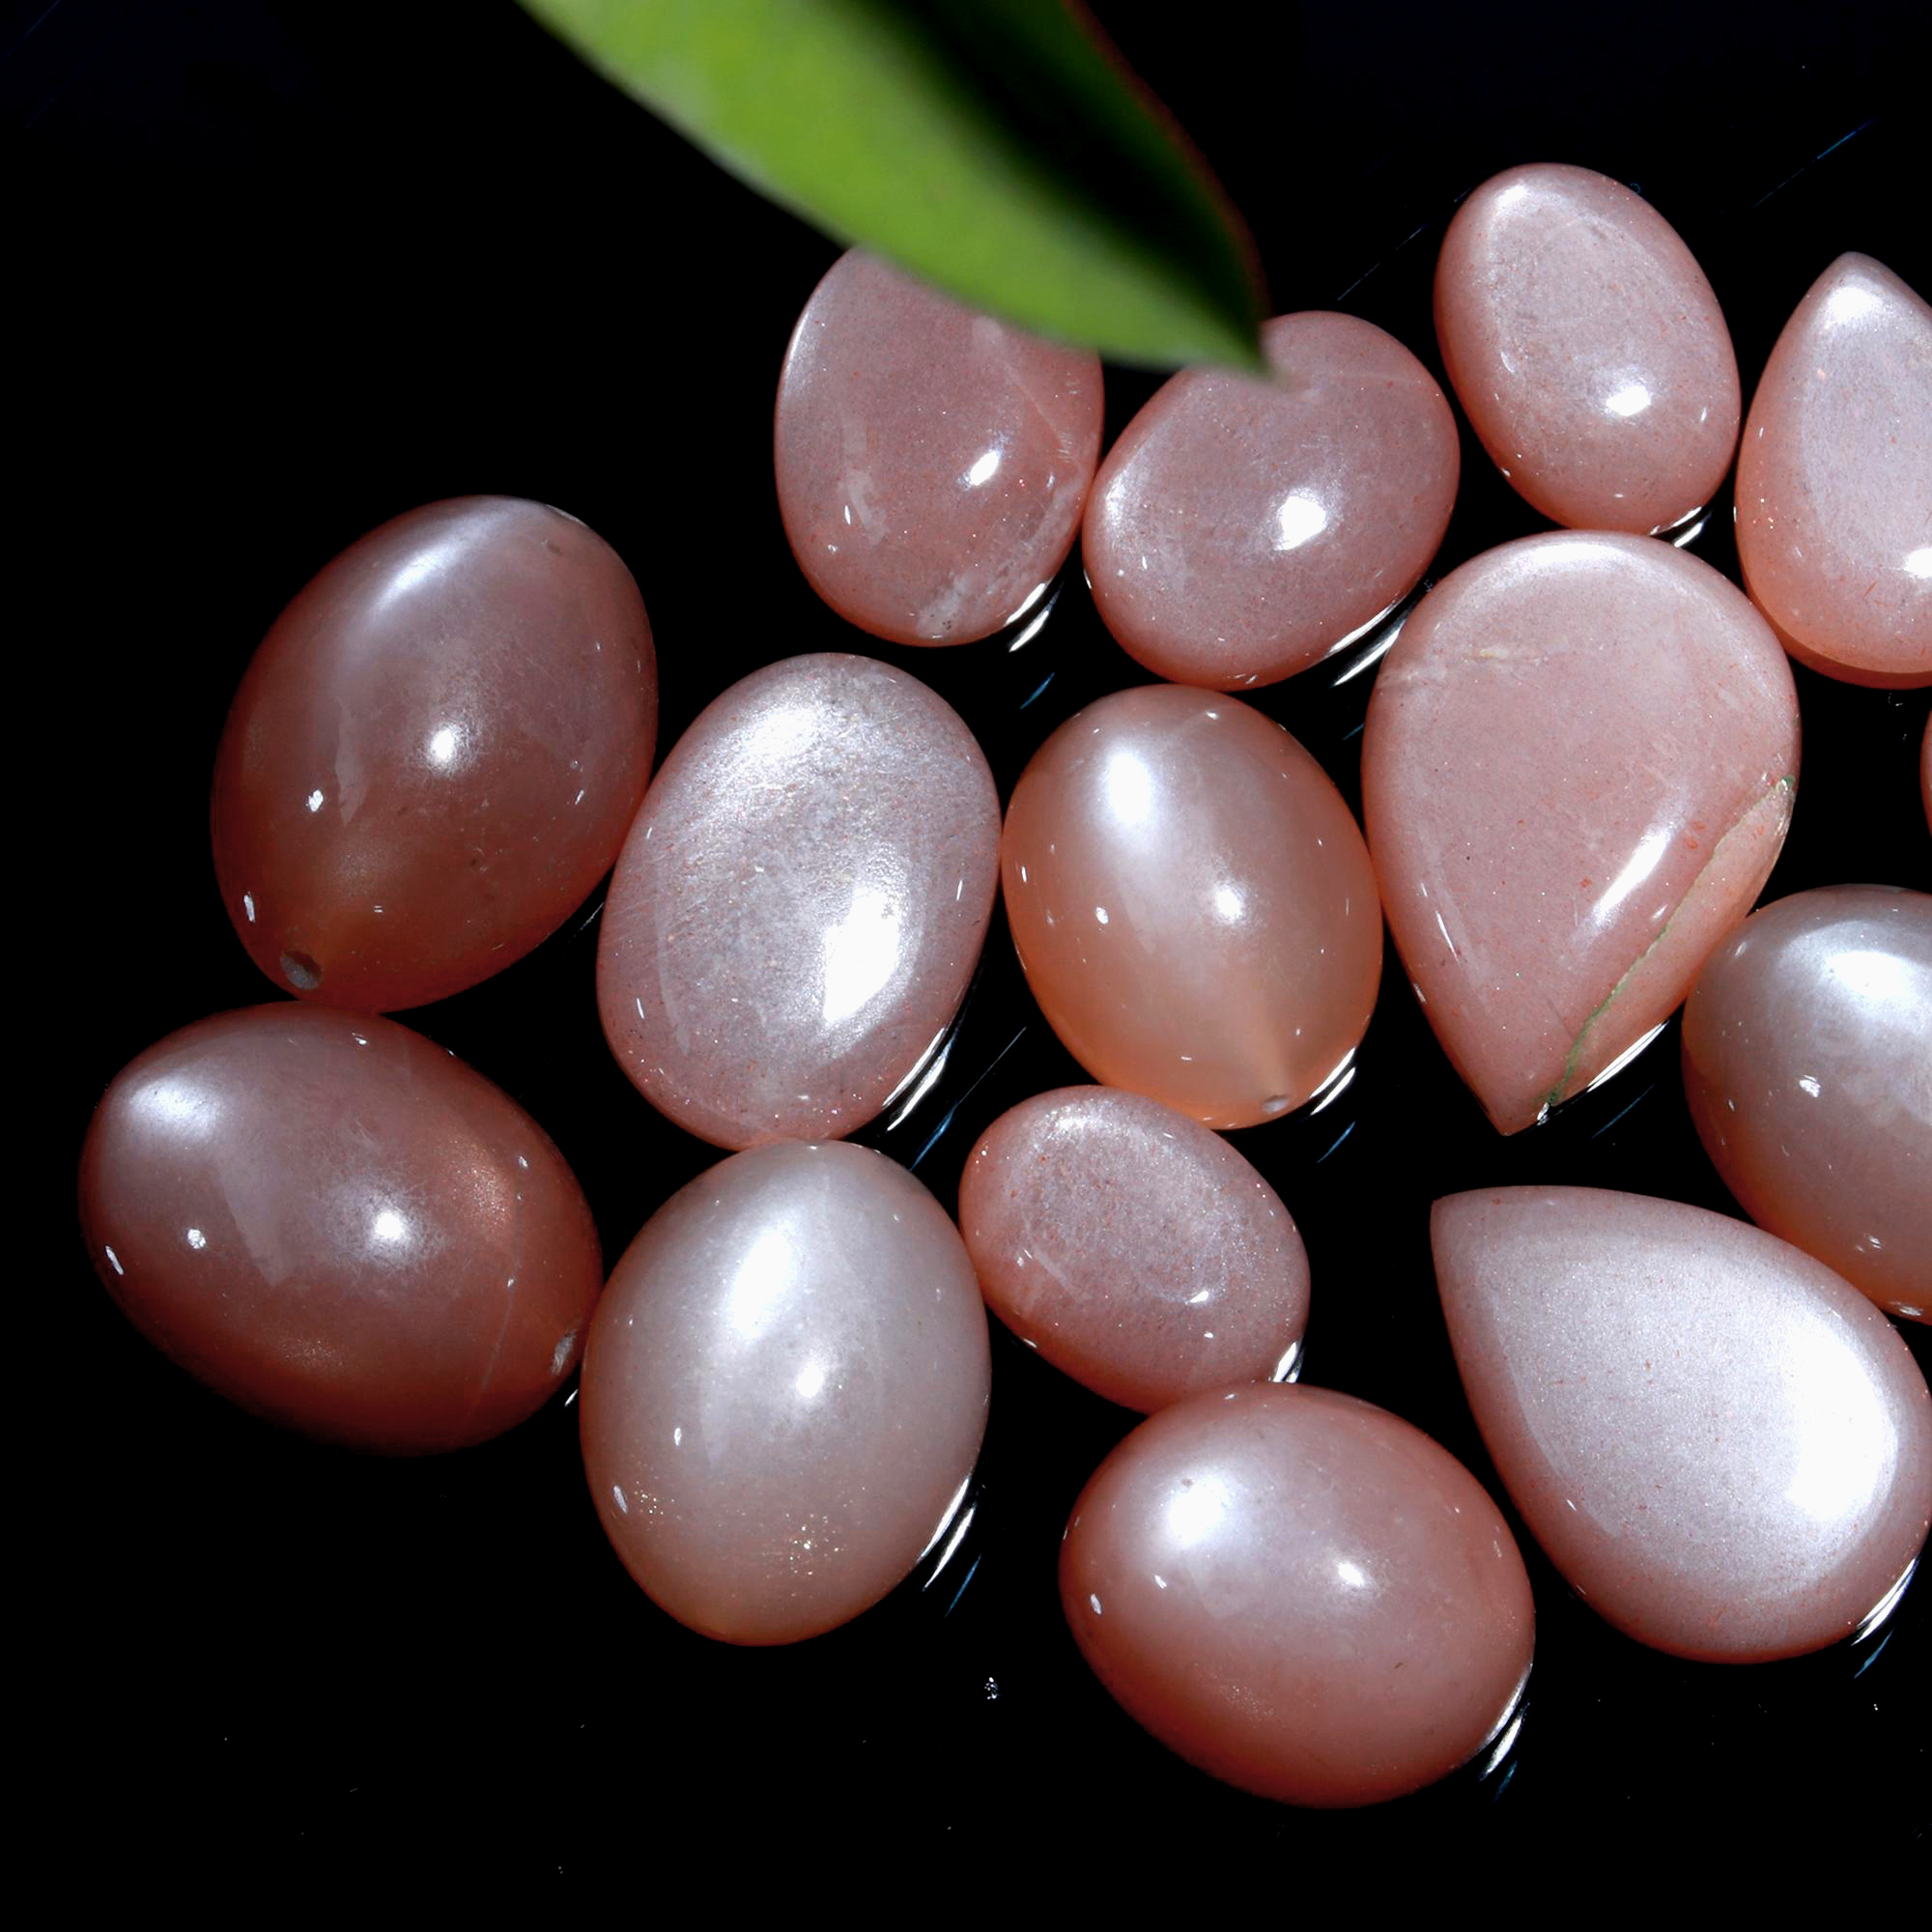 15 Pcs. 94Cts. Natural Peach Rainbow Moonstone polished Mix Cabochon Wholesale Loose Lot Size 18x10 15x9mm Gemstone for jewelry#1136